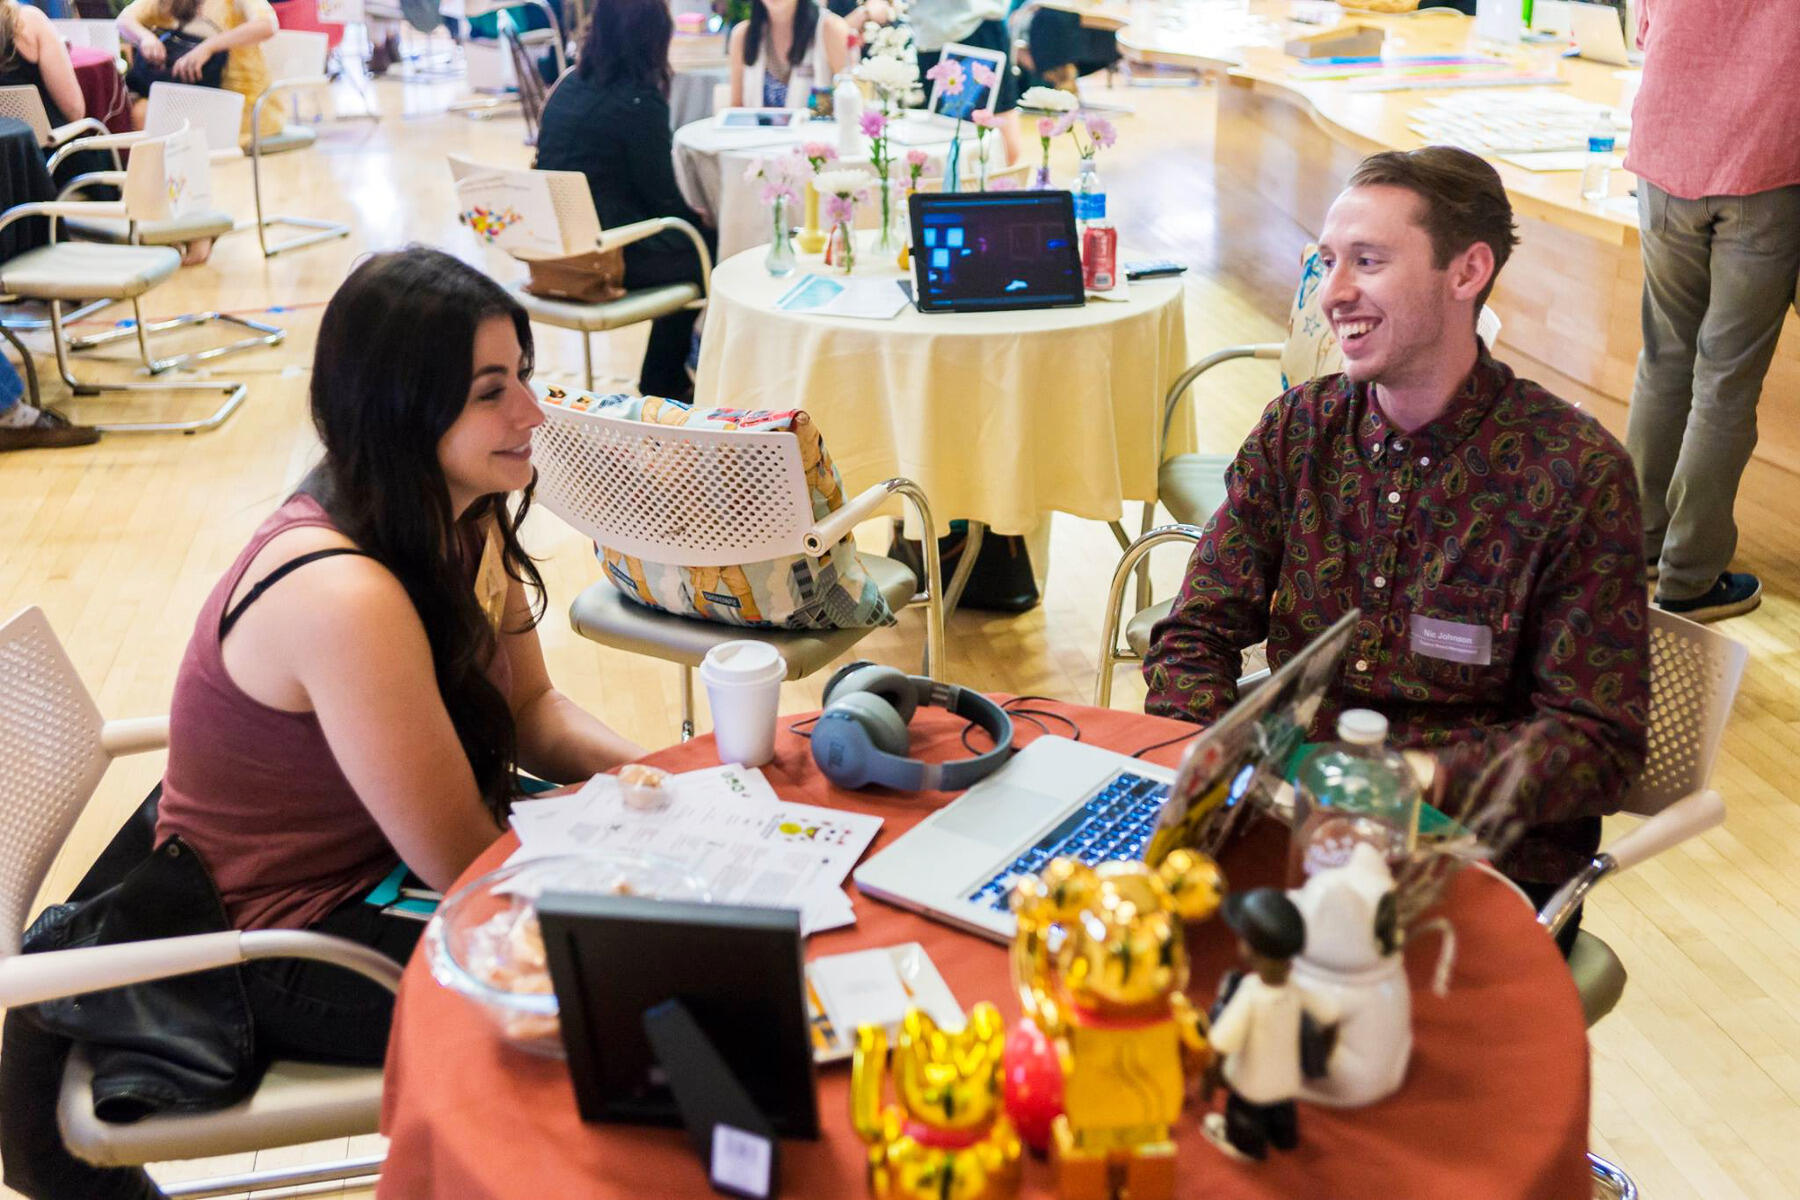 Nic Johnson (right), a VCU Brandcenter student, speaks with a recruiter at the reverse career fair.